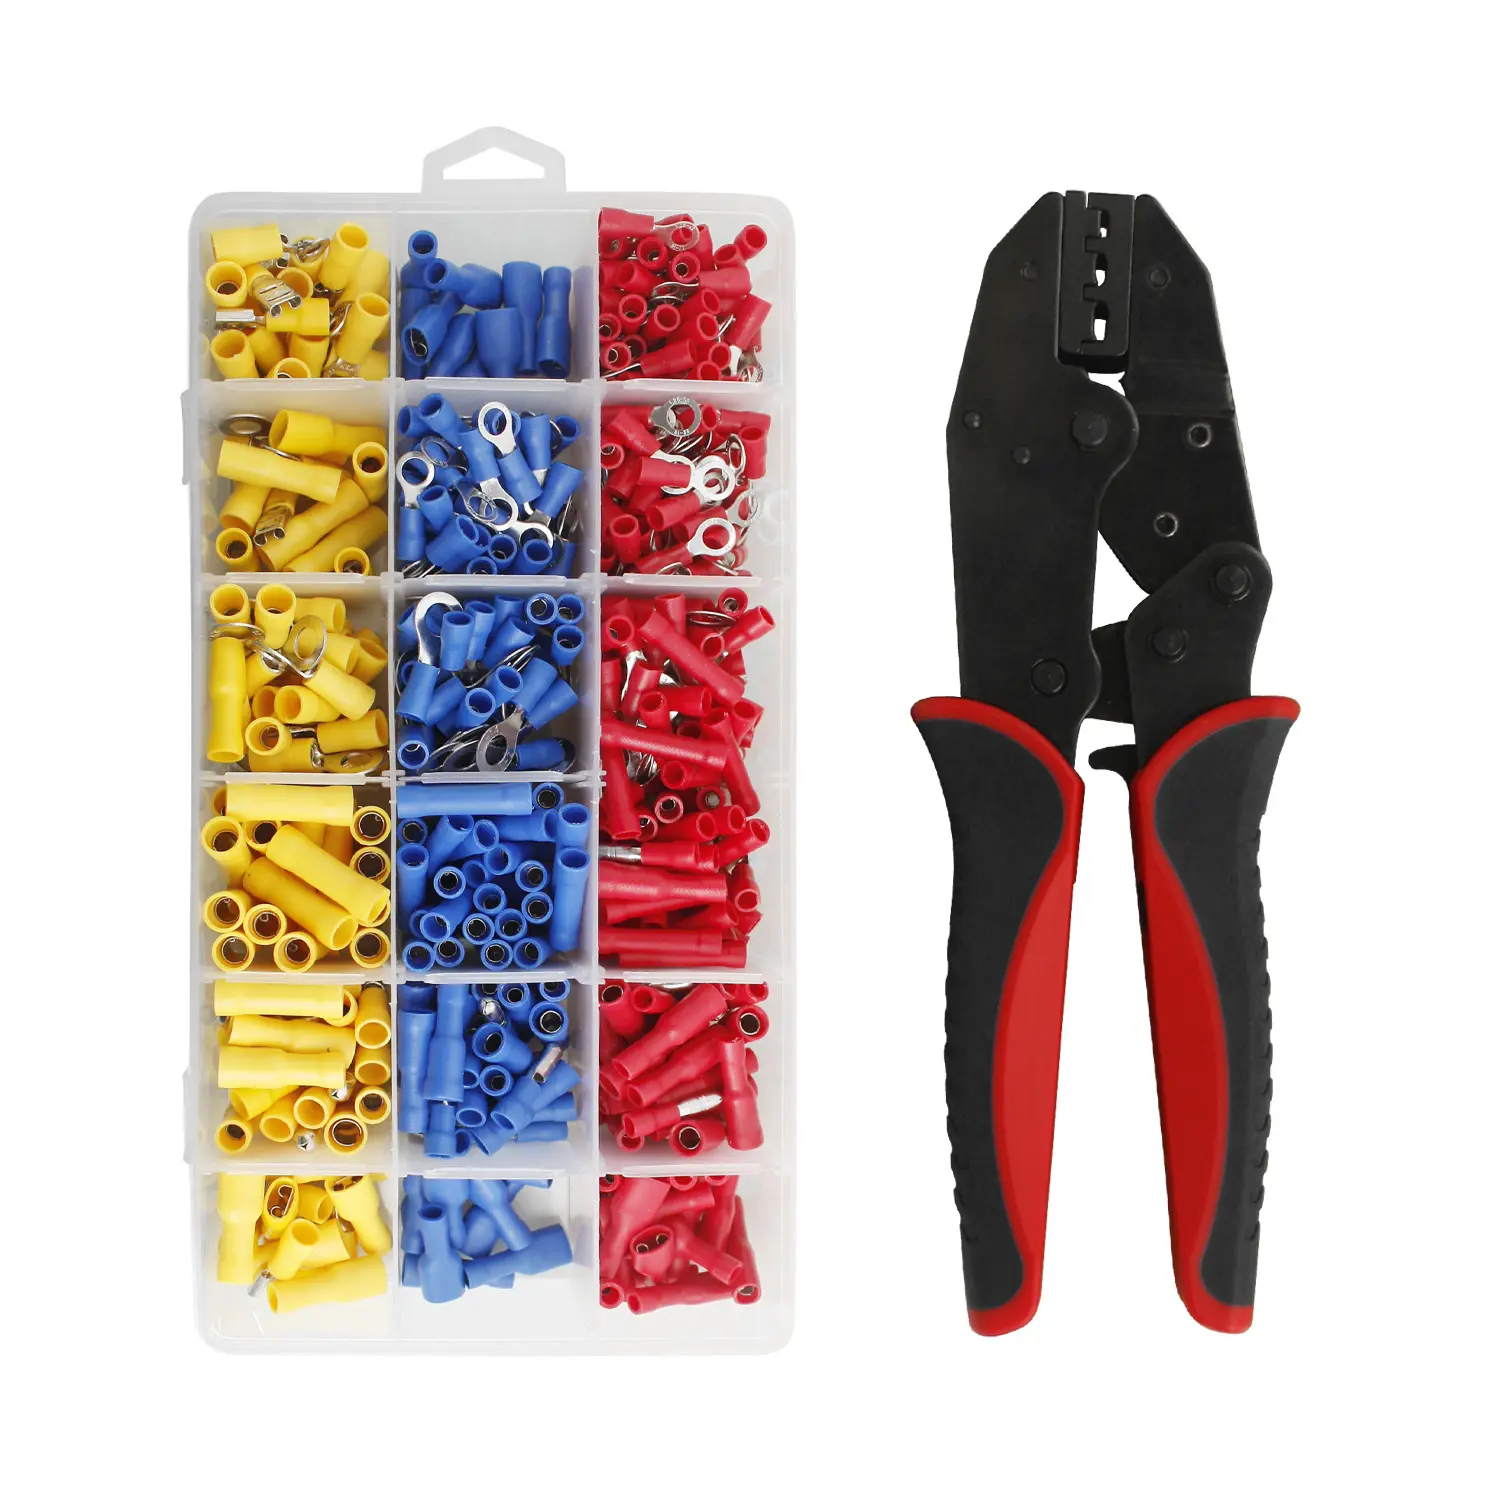 Top Quality Crimping Pliers Jaw Handheld Price Crimping Plier Durable Crimping Pliers